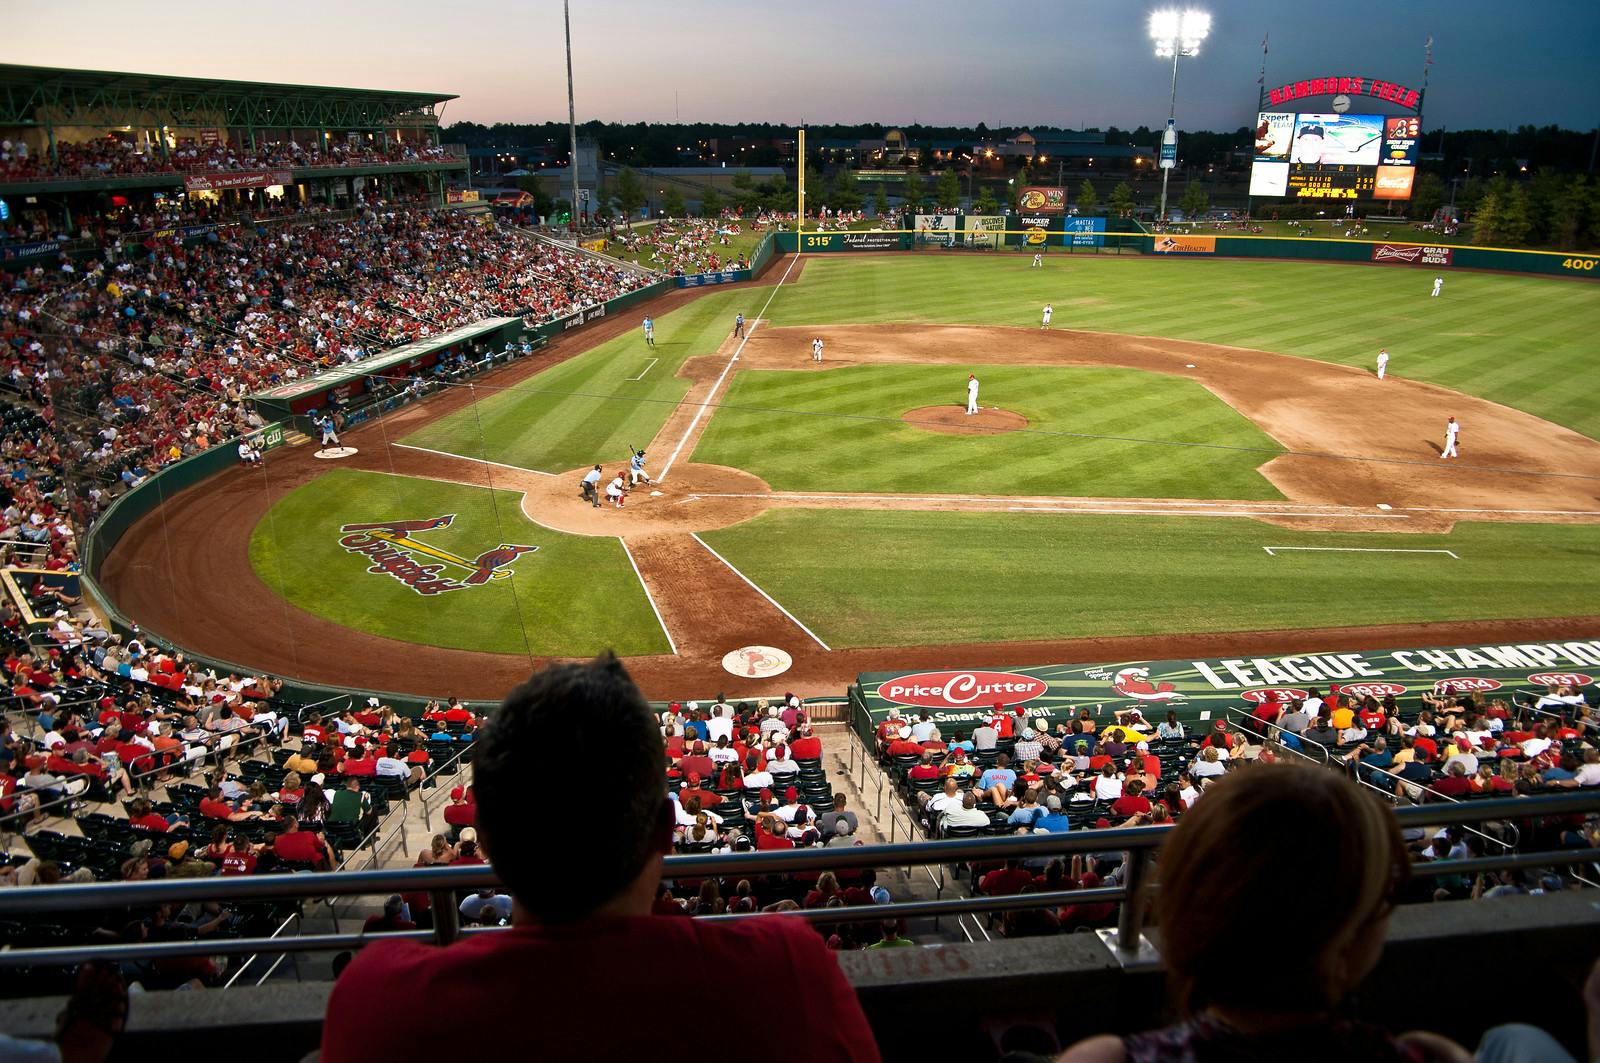 What To Look Forward To With The Springfield Cardinals This 2020 Season